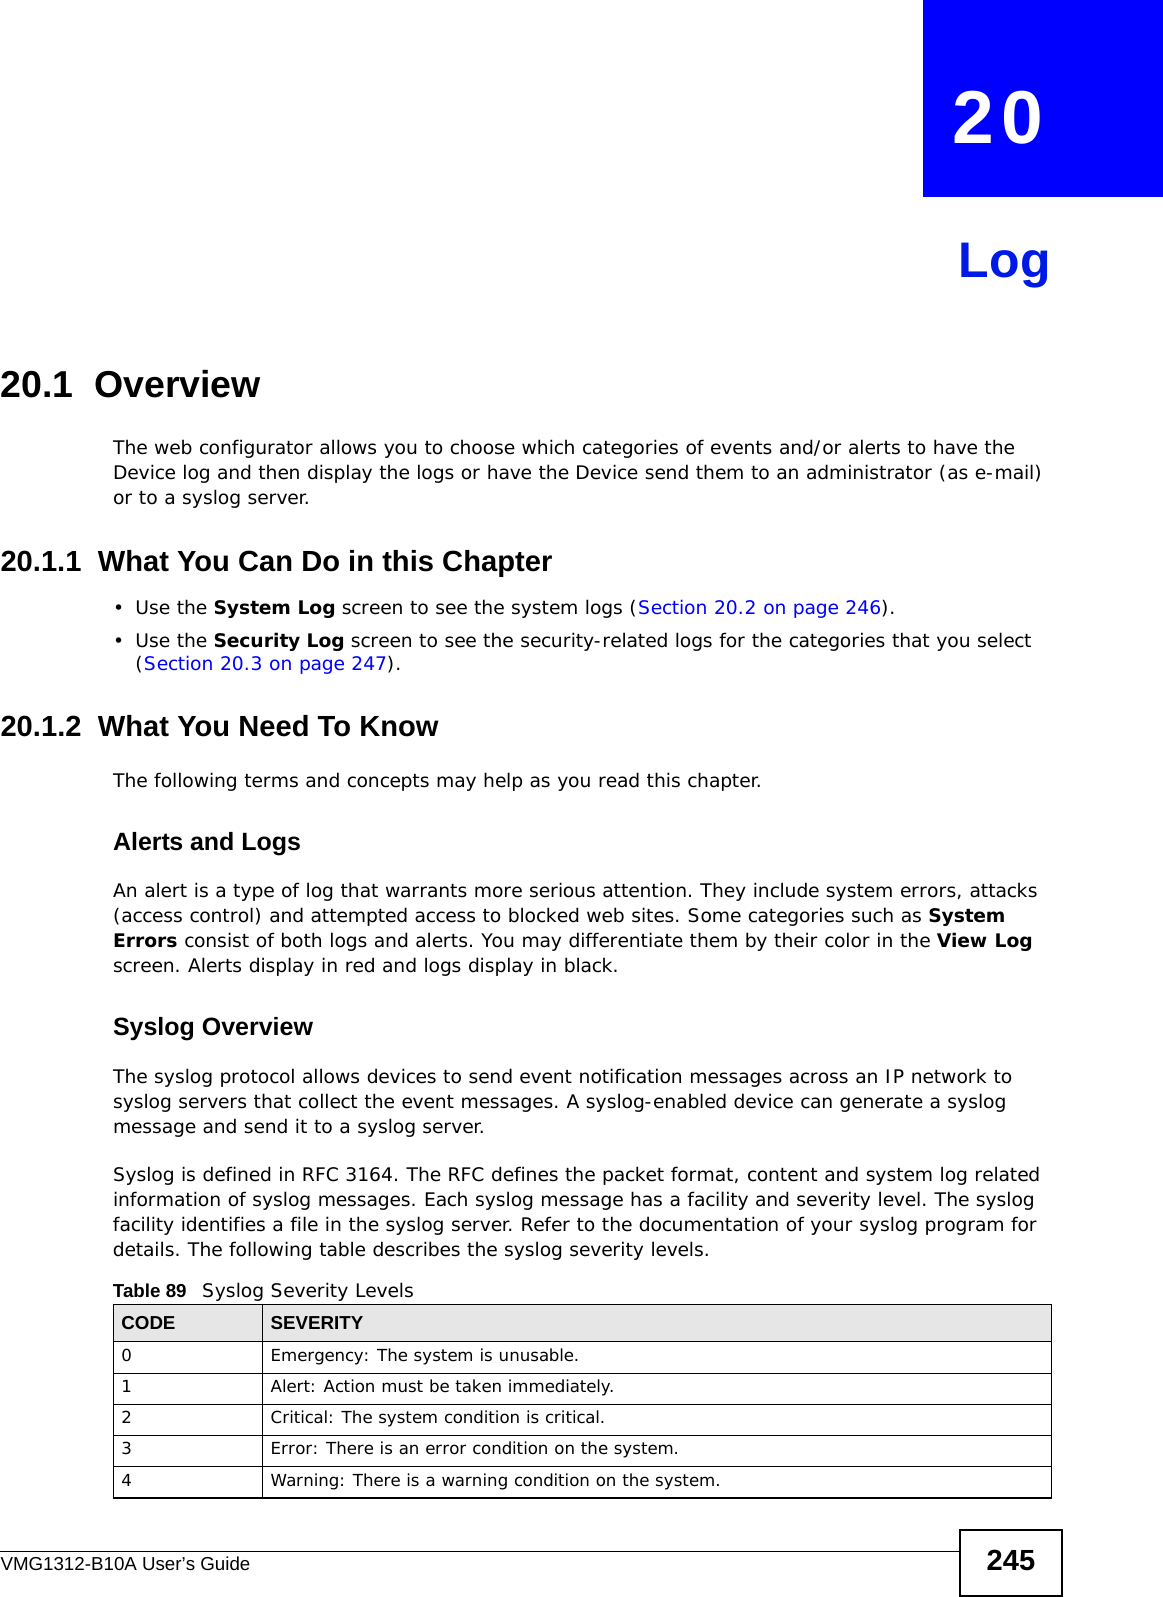 VMG1312-B10A User’s Guide 245CHAPTER   20Log20.1  OverviewThe web configurator allows you to choose which categories of events and/or alerts to have the Device log and then display the logs or have the Device send them to an administrator (as e-mail) or to a syslog server. 20.1.1  What You Can Do in this Chapter•Use the System Log screen to see the system logs (Section 20.2 on page 246).•Use the Security Log screen to see the security-related logs for the categories that you select (Section 20.3 on page 247).20.1.2  What You Need To KnowThe following terms and concepts may help as you read this chapter.Alerts and LogsAn alert is a type of log that warrants more serious attention. They include system errors, attacks (access control) and attempted access to blocked web sites. Some categories such as System Errors consist of both logs and alerts. You may differentiate them by their color in the View Log screen. Alerts display in red and logs display in black.Syslog Overview The syslog protocol allows devices to send event notification messages across an IP network to syslog servers that collect the event messages. A syslog-enabled device can generate a syslog message and send it to a syslog server.Syslog is defined in RFC 3164. The RFC defines the packet format, content and system log related information of syslog messages. Each syslog message has a facility and severity level. The syslog facility identifies a file in the syslog server. Refer to the documentation of your syslog program for details. The following table describes the syslog severity levels. Table 89   Syslog Severity LevelsCODE SEVERITY0 Emergency: The system is unusable.1 Alert: Action must be taken immediately.2 Critical: The system condition is critical.3 Error: There is an error condition on the system.4 Warning: There is a warning condition on the system.